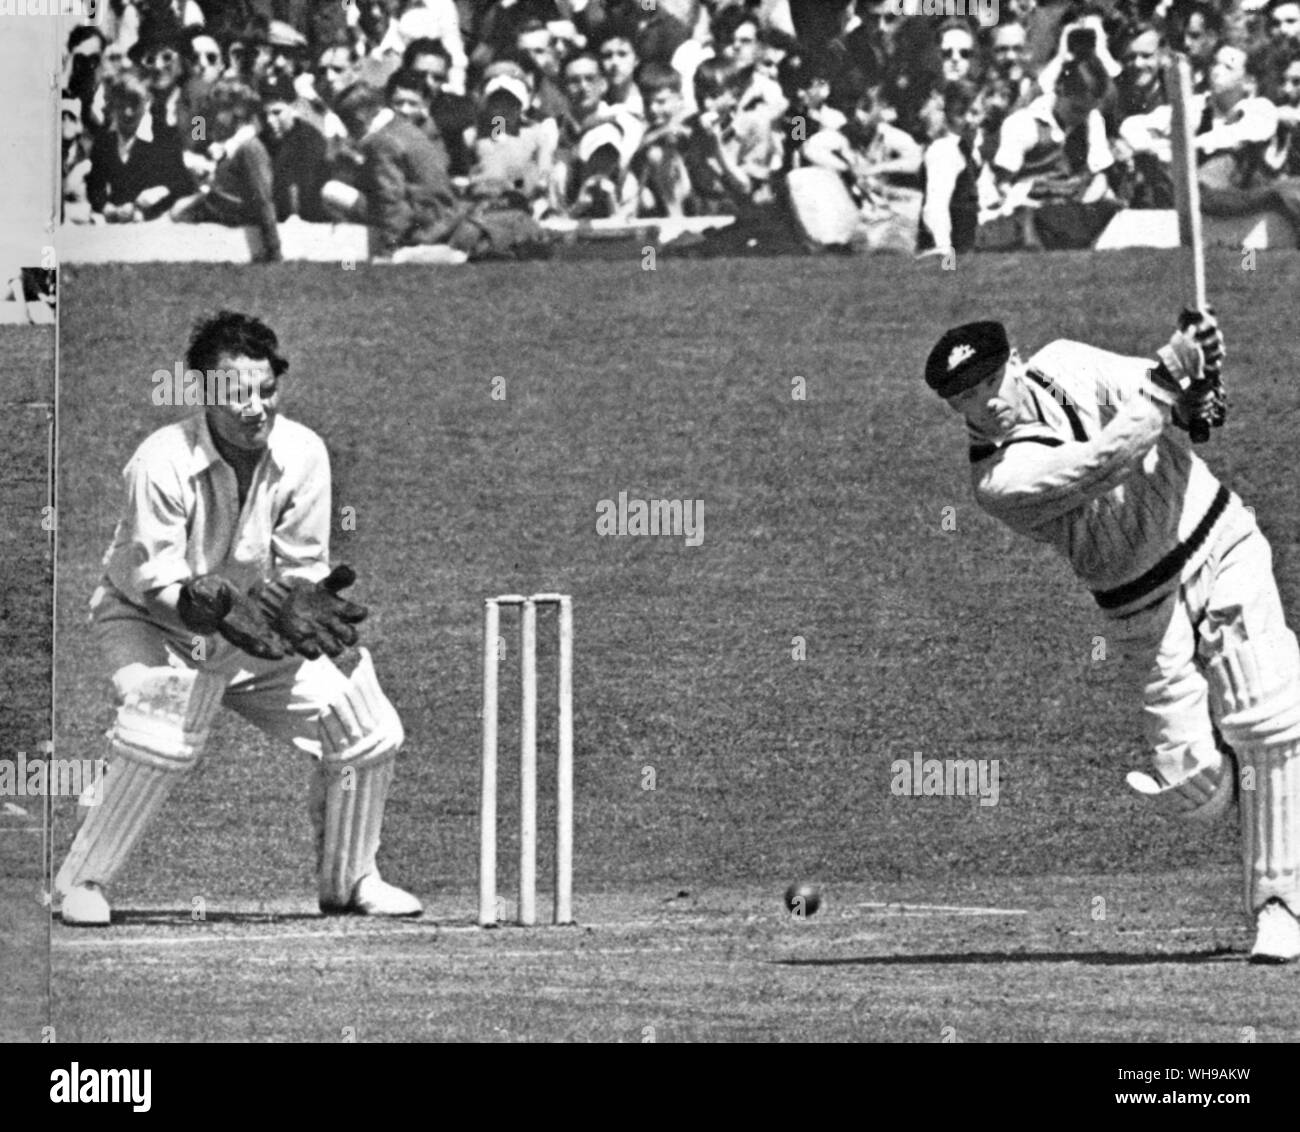 Sir Don G Bradman batting against Essex at Southend in 1948. Peter Smith is the bowler and F Rist is keeping wicket Stock Photo